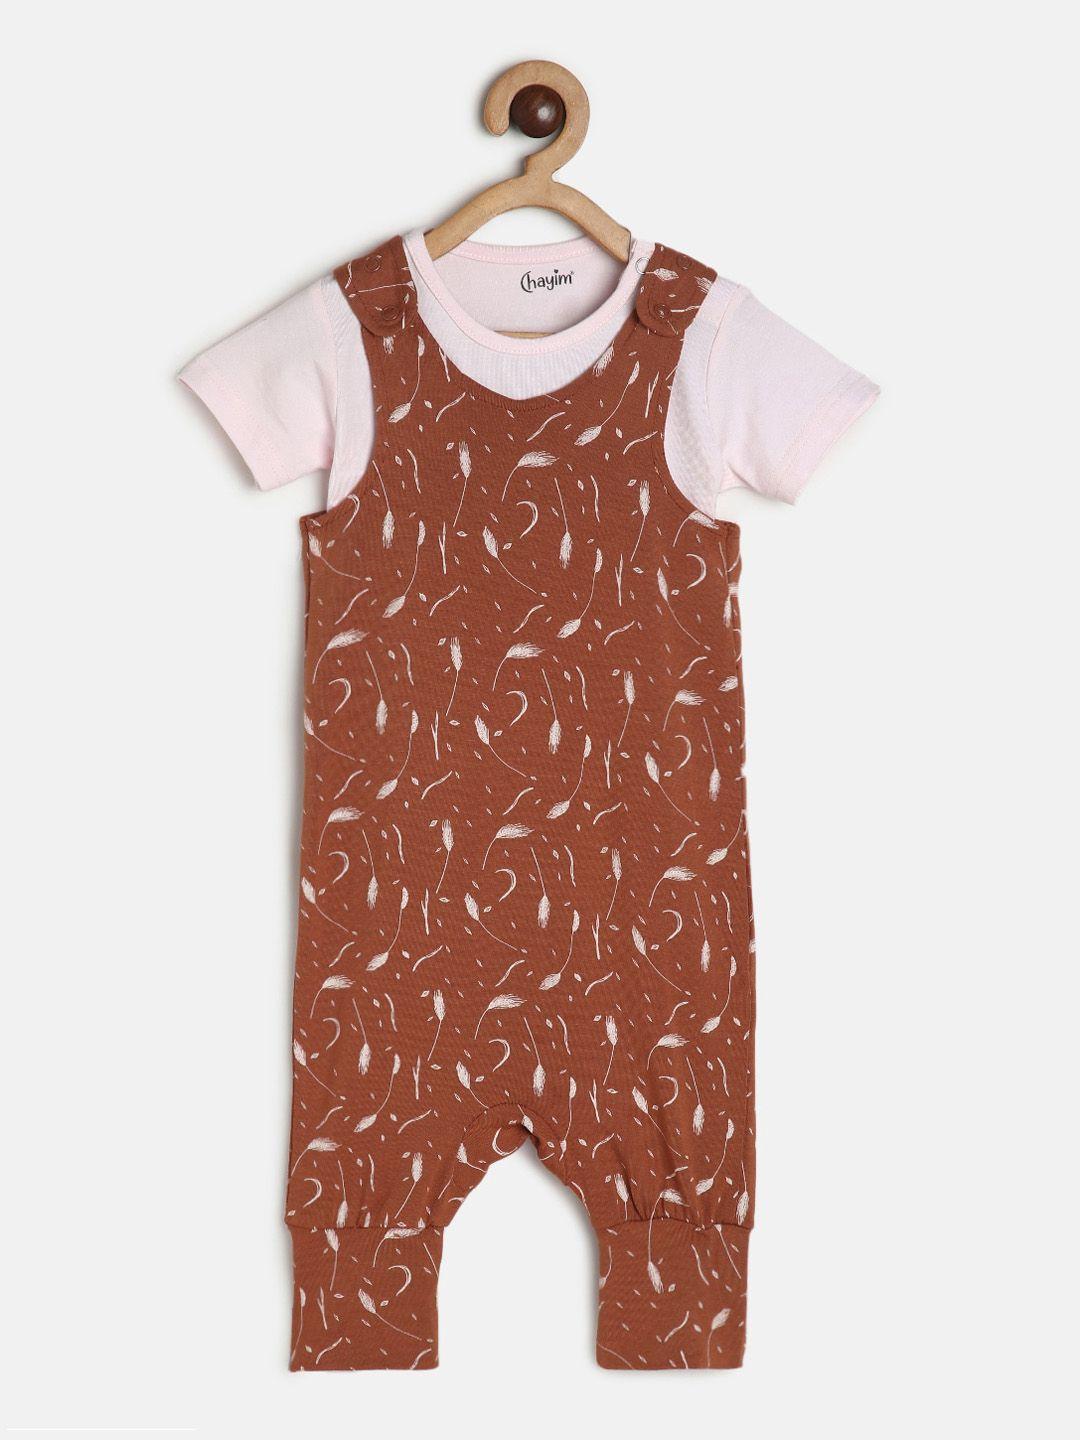 chayim-infants-abstract-printed-cotton-dungaree-with-t-shirt